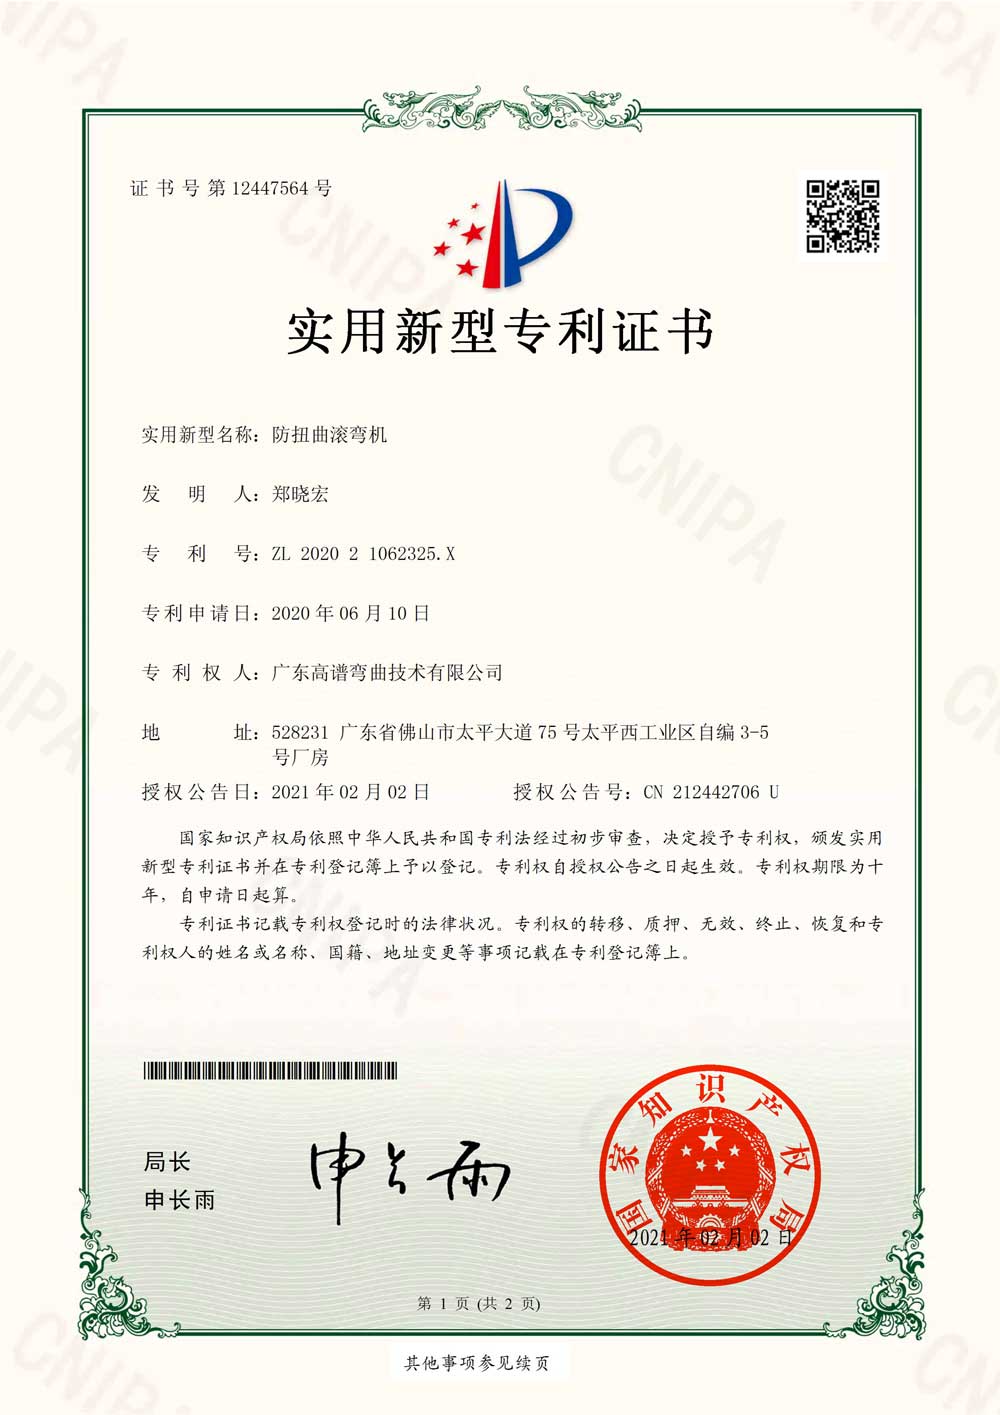 Patent certificate for anti-distortion of roller bender